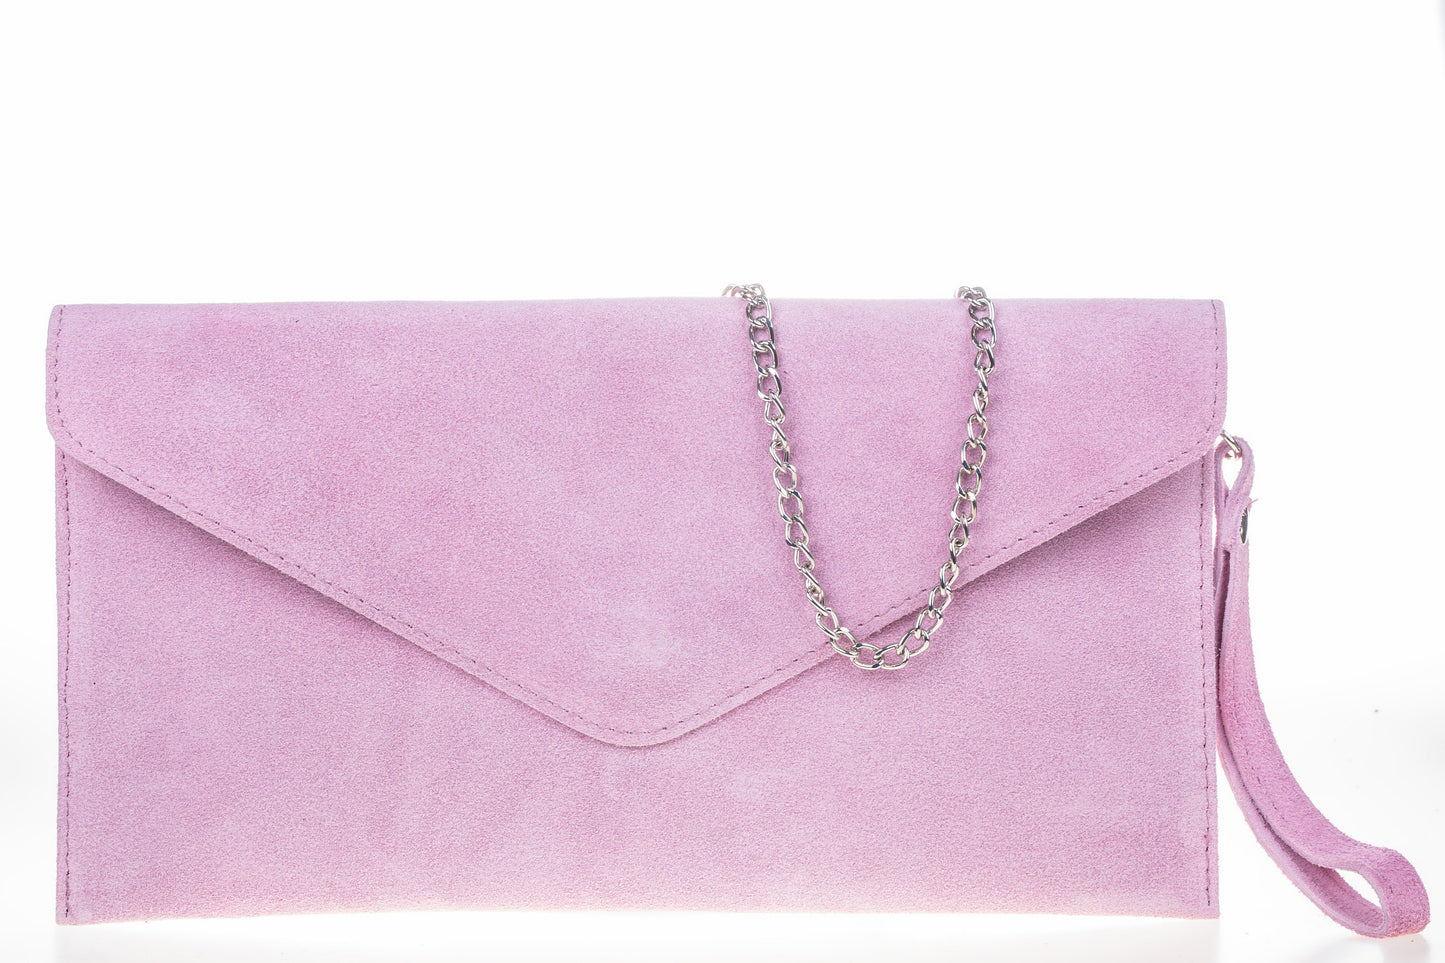 Pink envelope clutch bag with chain strap